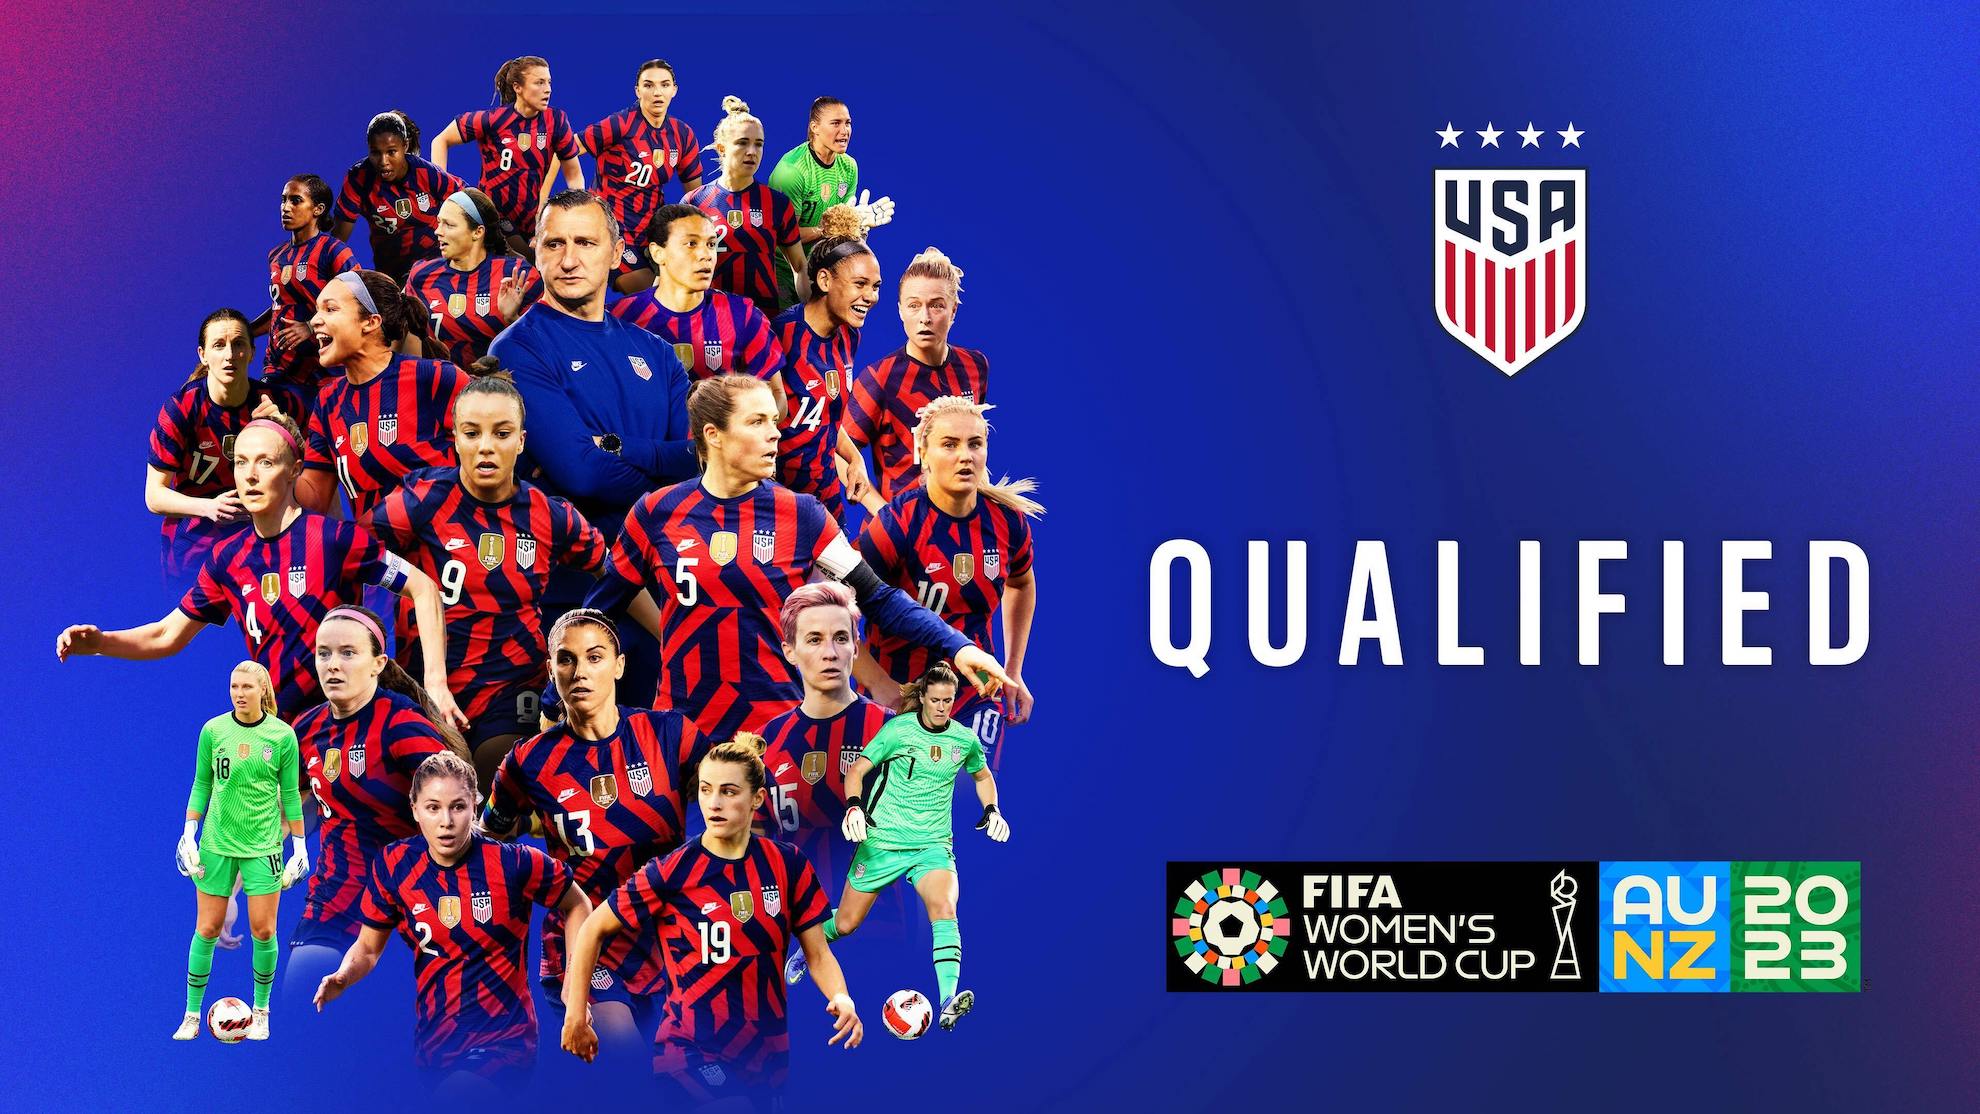 U.S. Women’s National Team Qualifies for 2023 FIFA Women’s World Cup in Australia and New Zealand